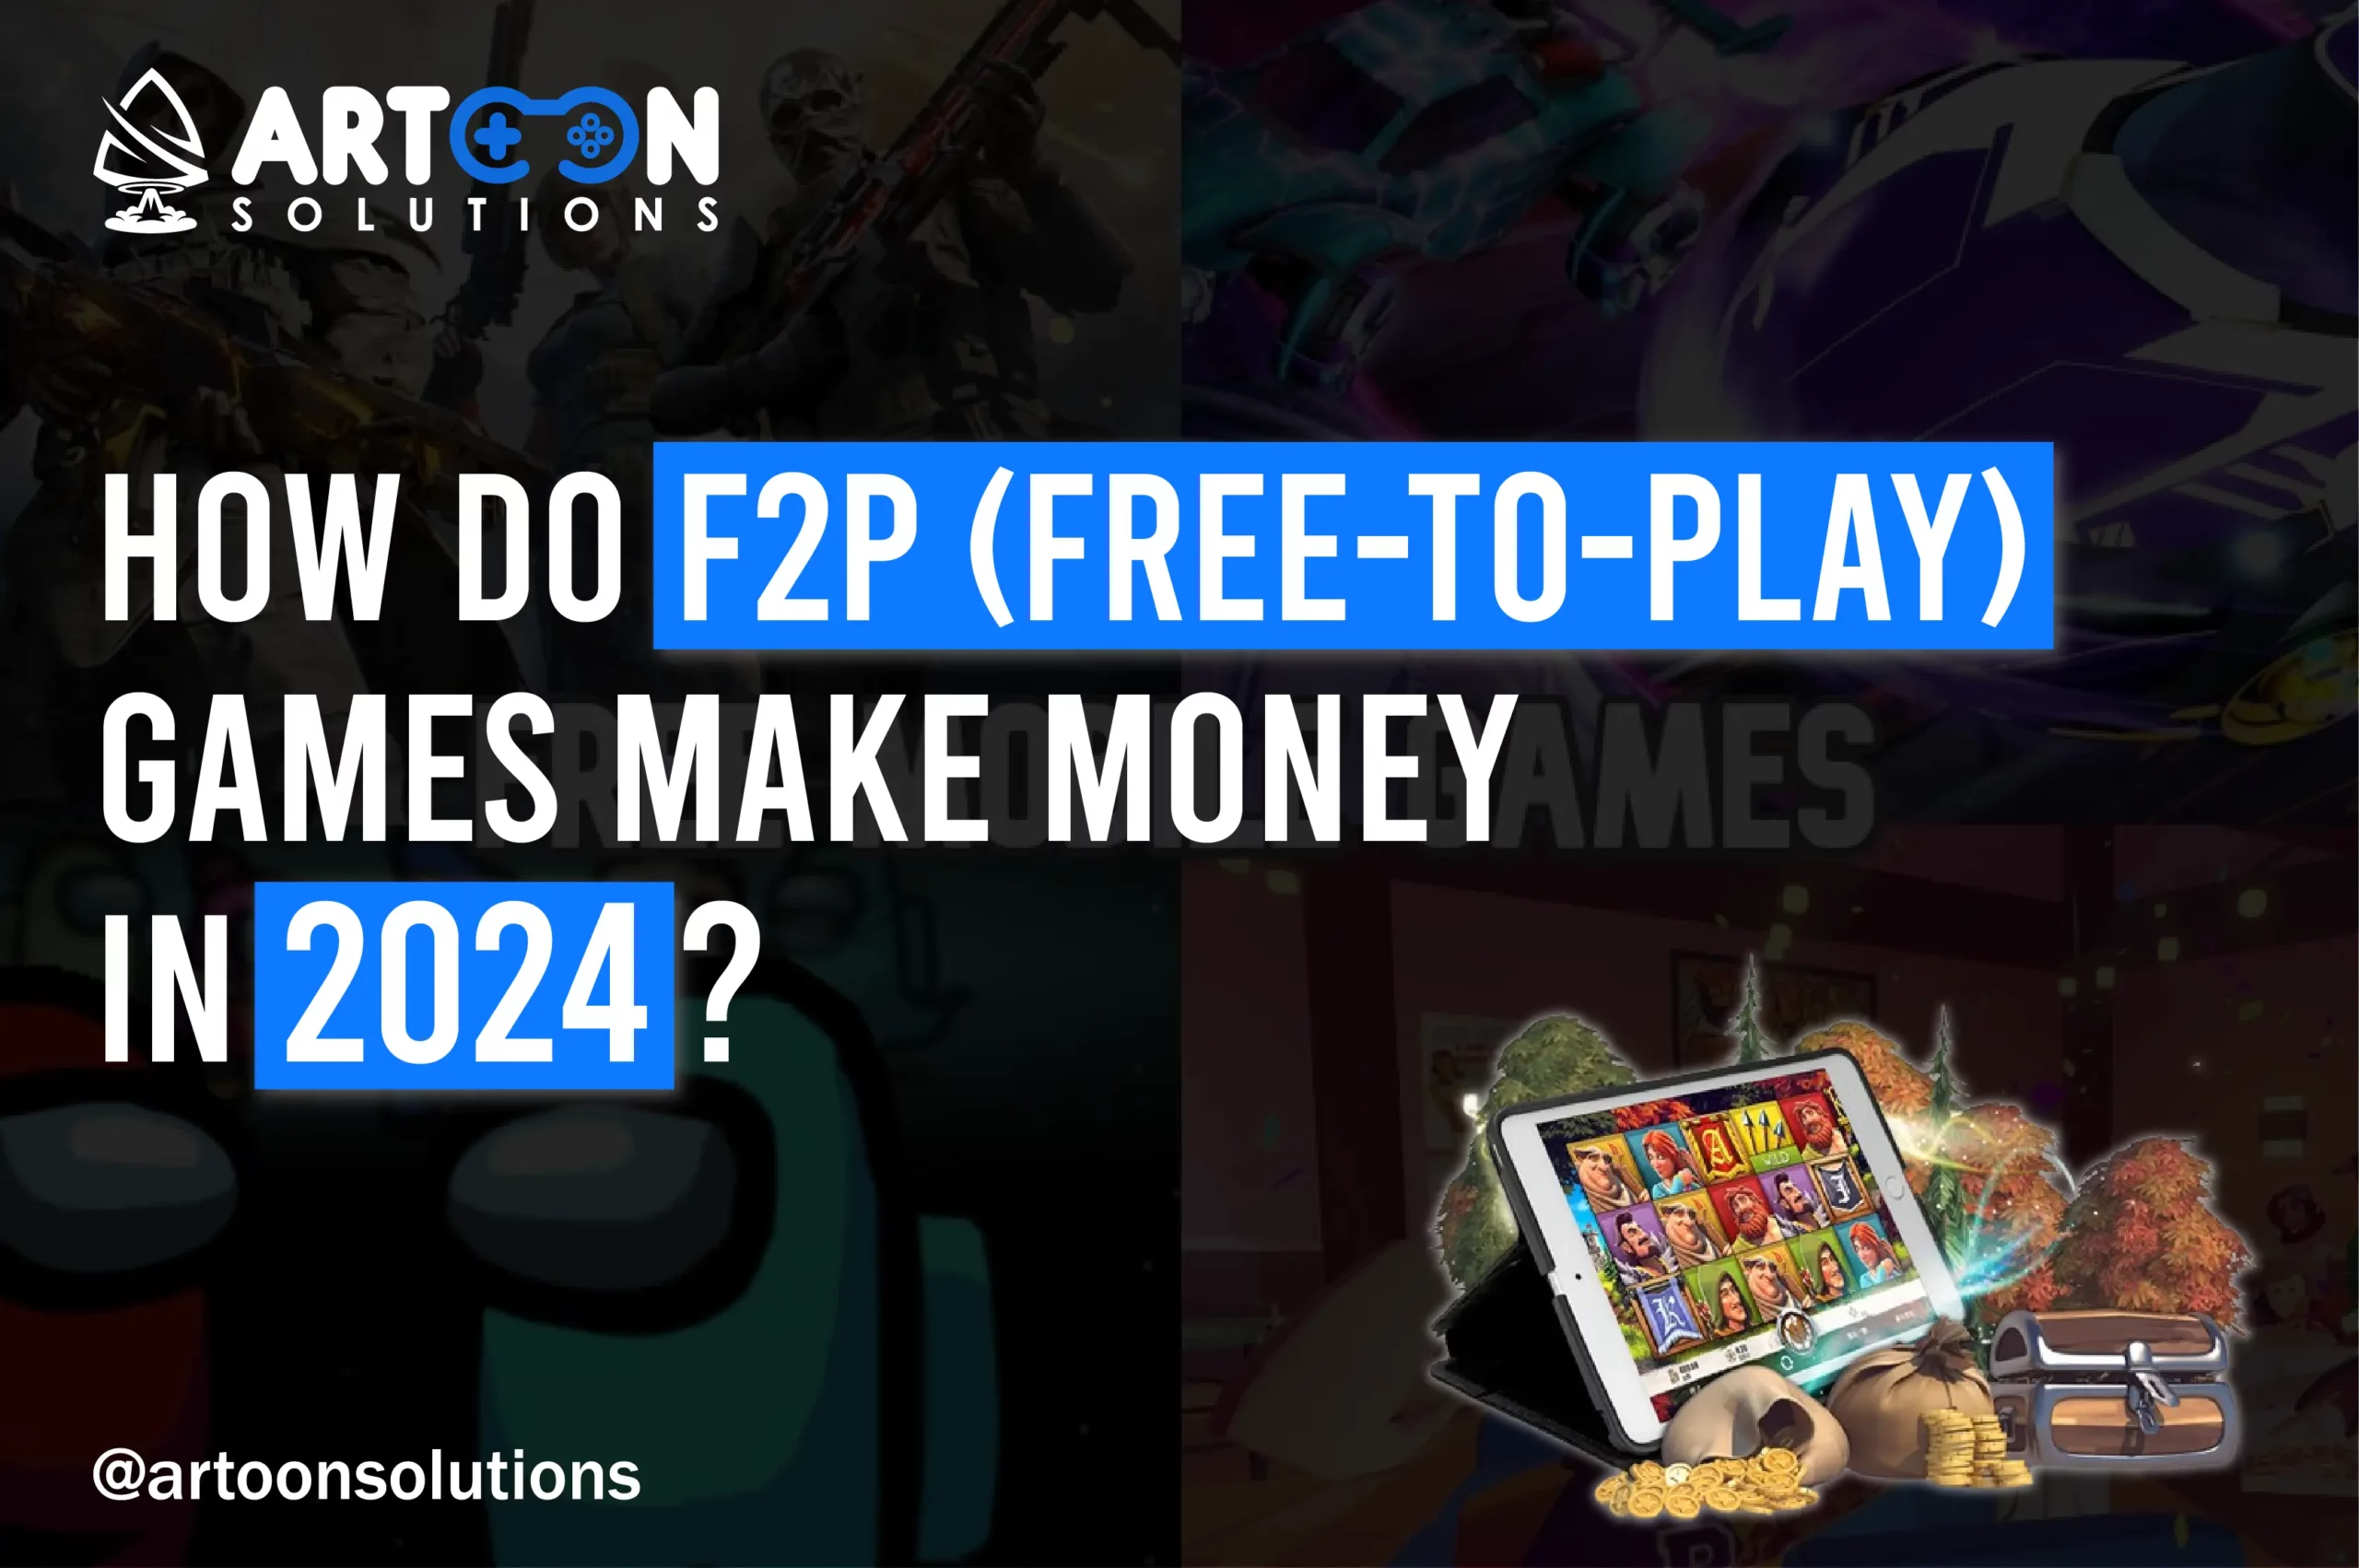 How Do Free-to-Play Games Earn Revenue Easily?